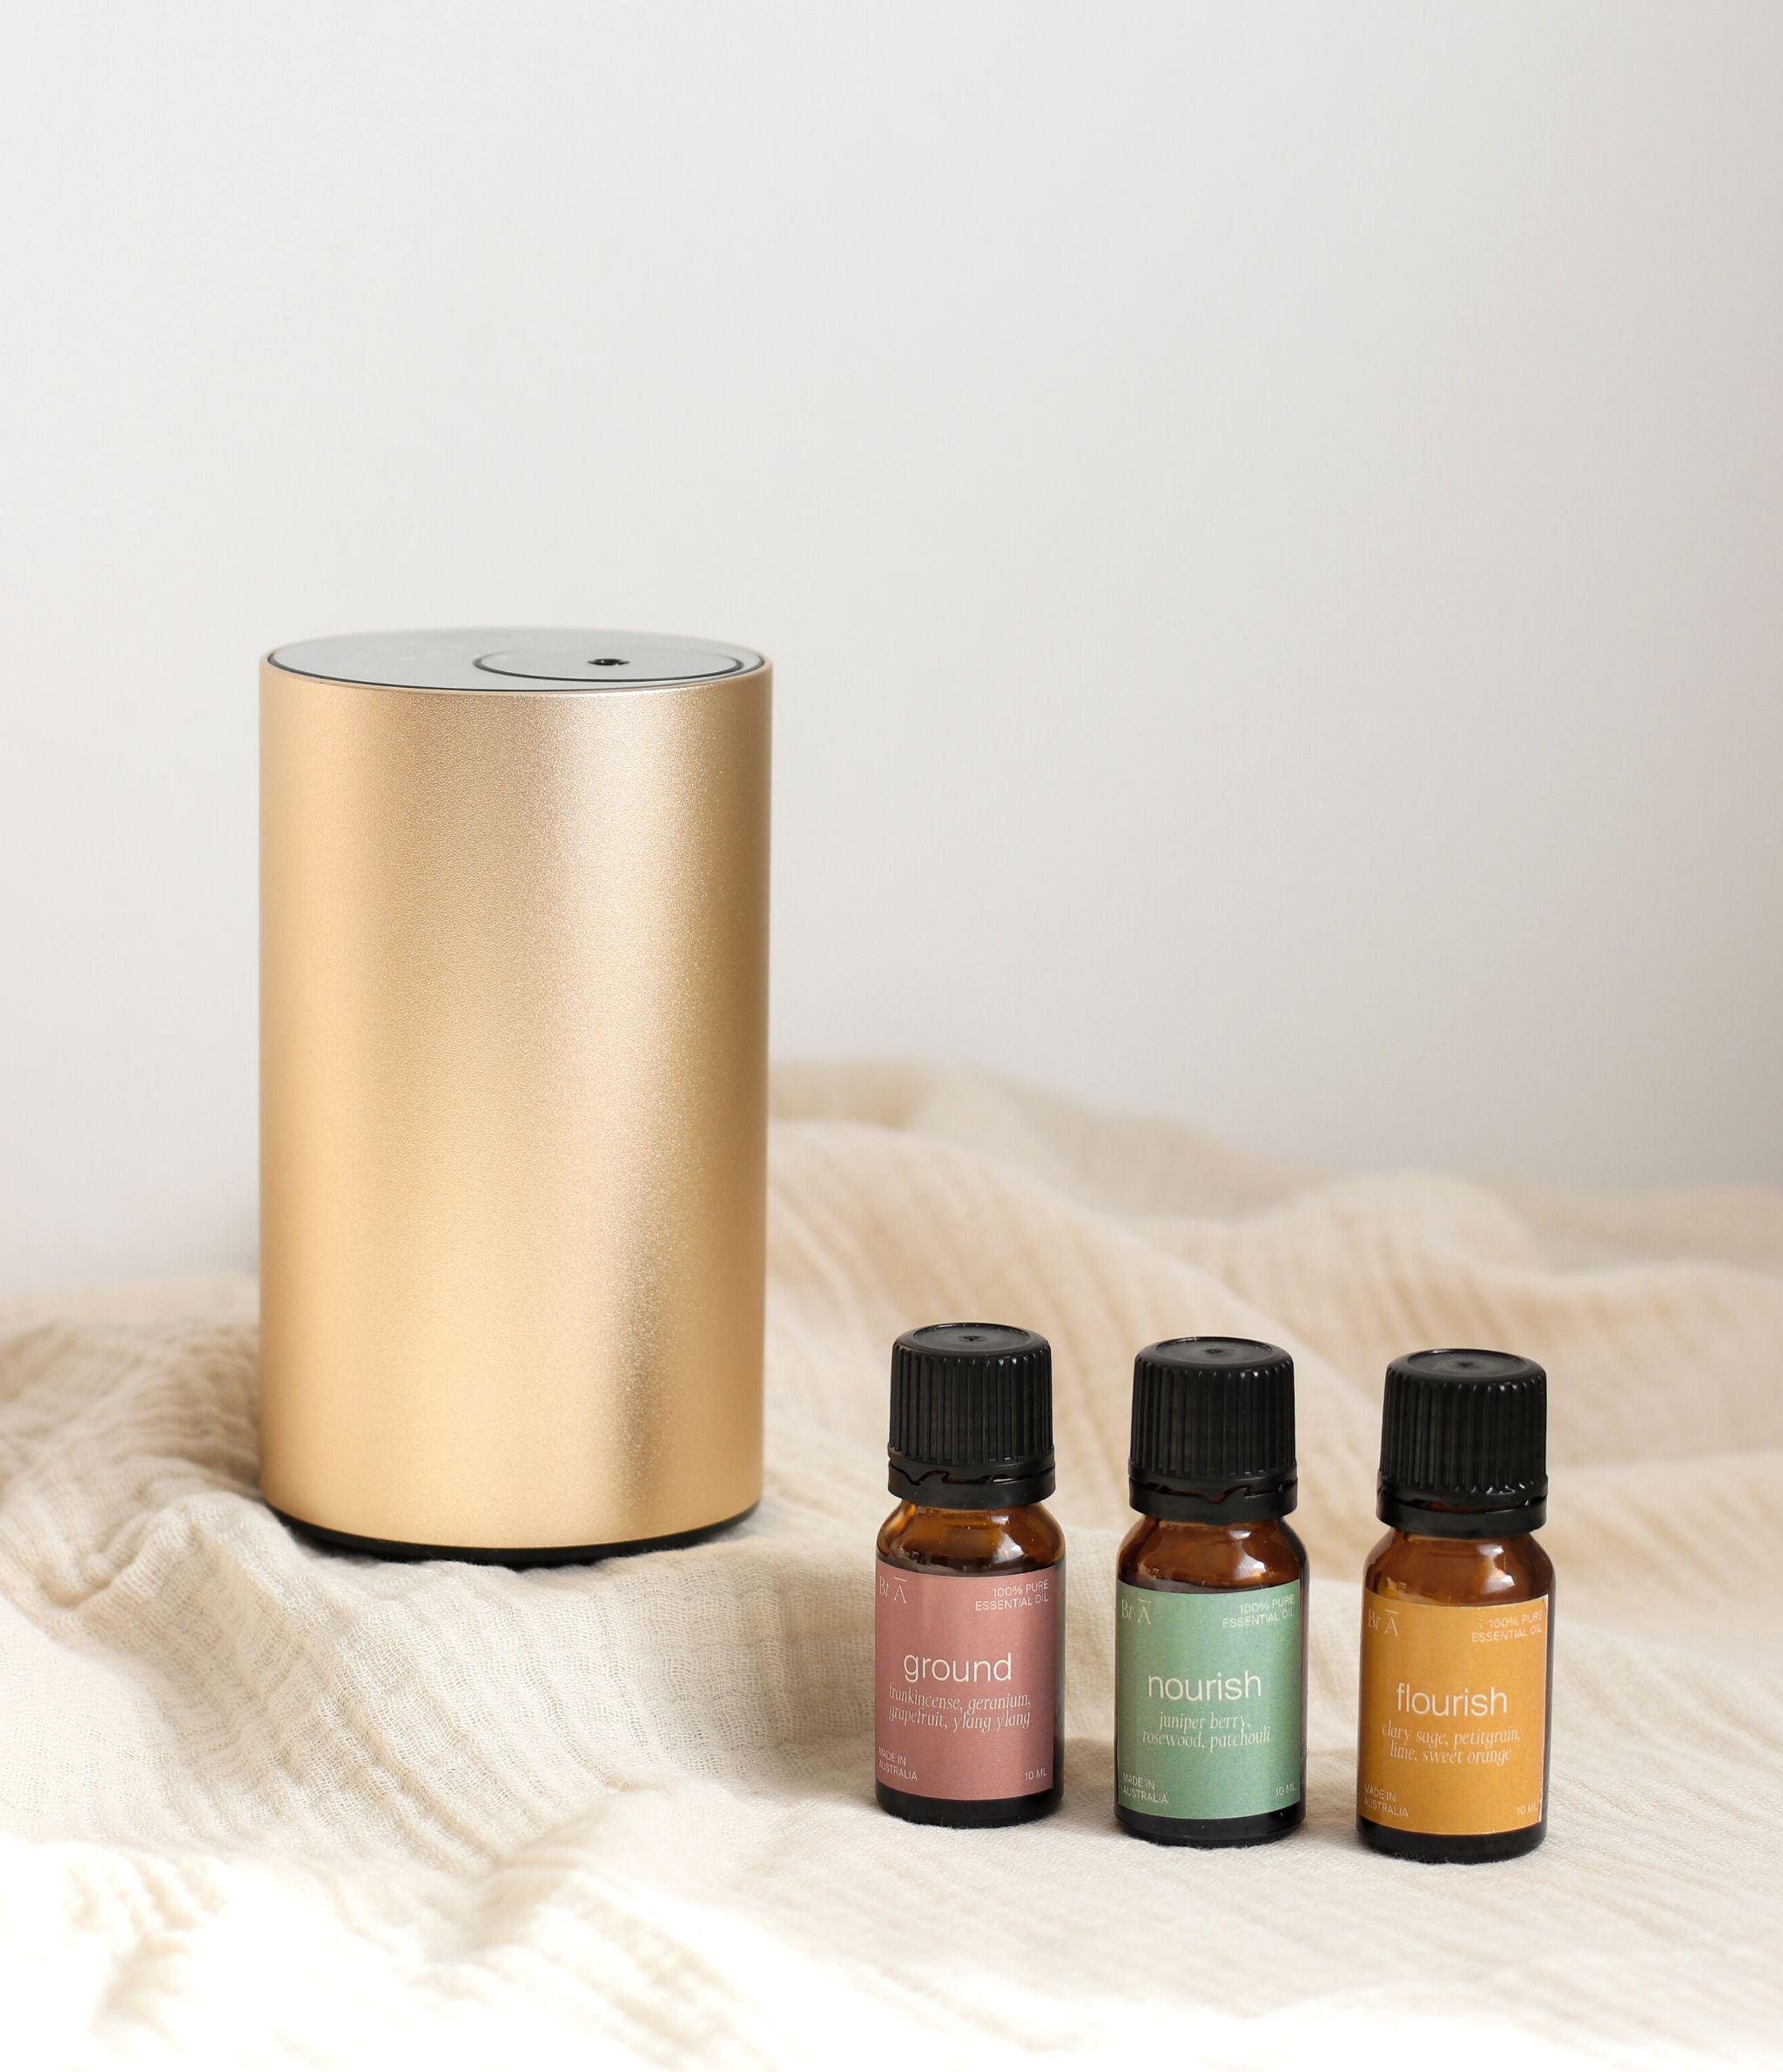 Ora diffuser gold and ground essential oil collection